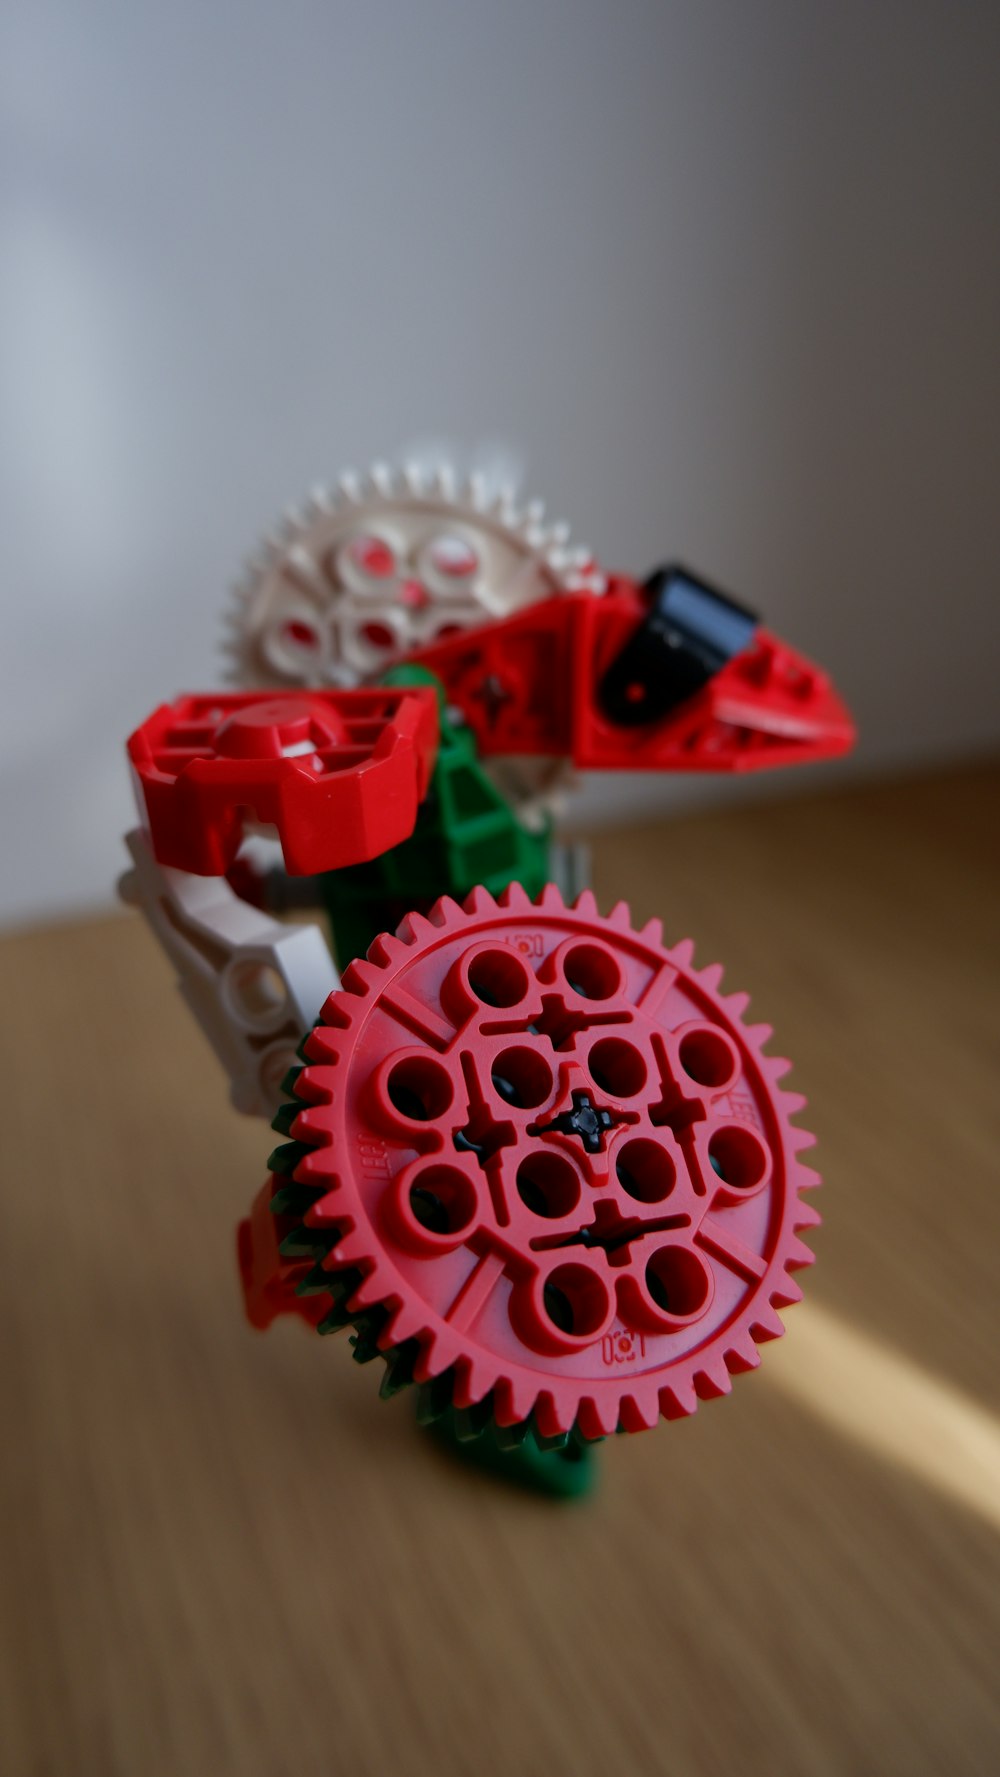 a red and white toy